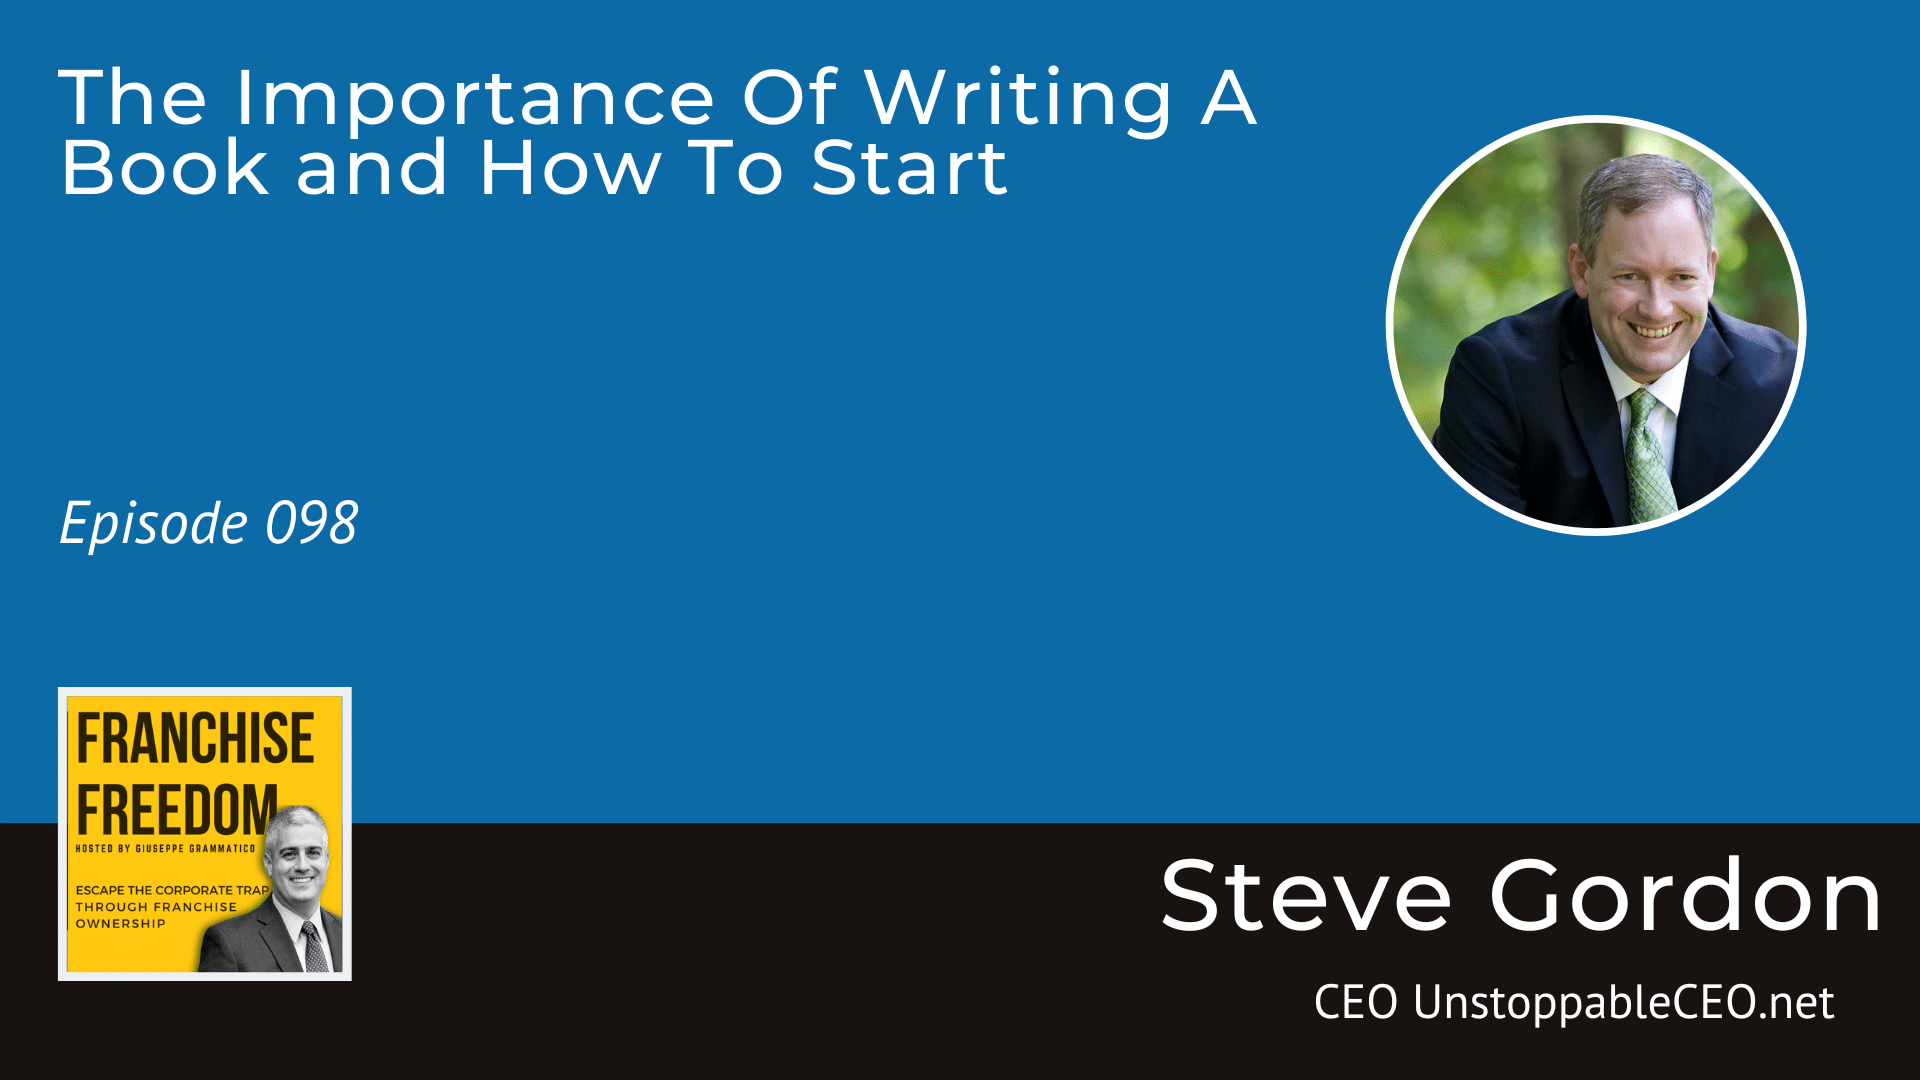 How to start writing a book